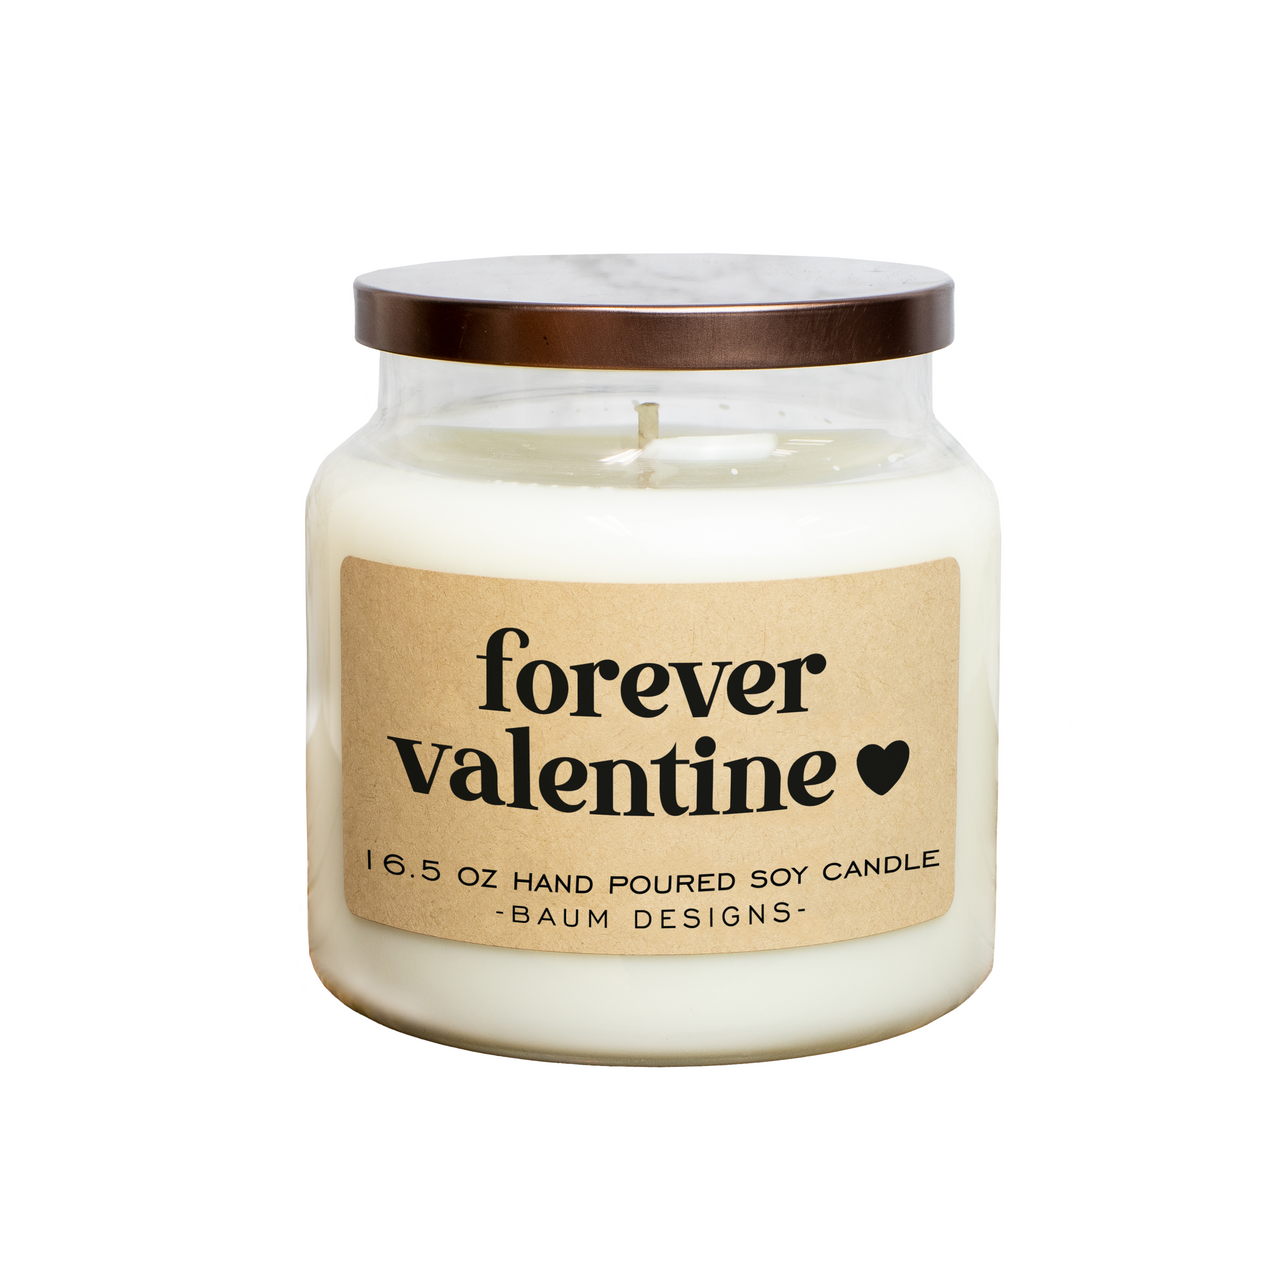 Forever Valentine Soy Candle Baum Designs